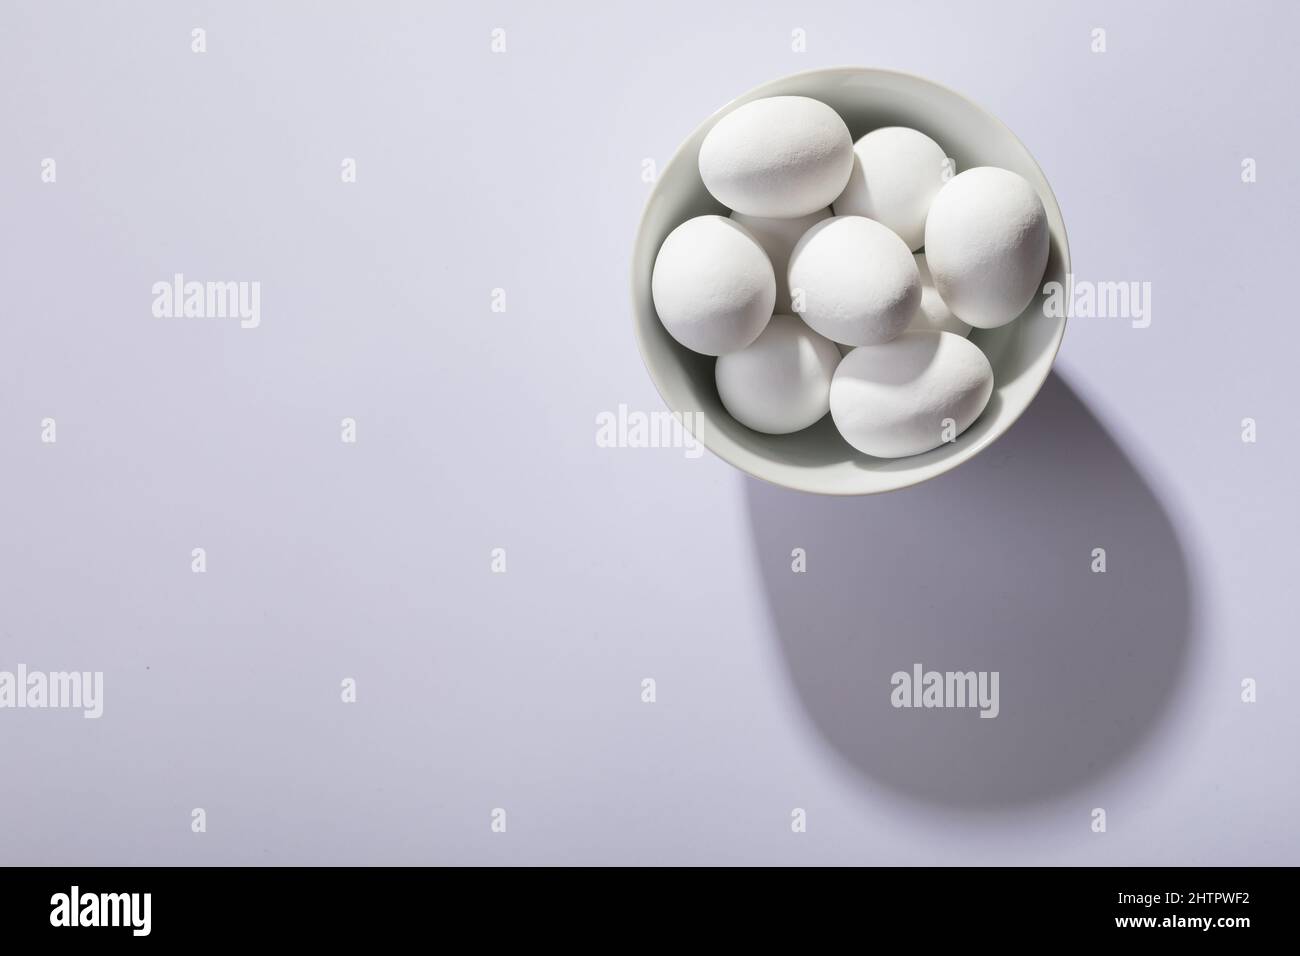 Overhead view of white eggs in bowl on table with empty space Stock Photo